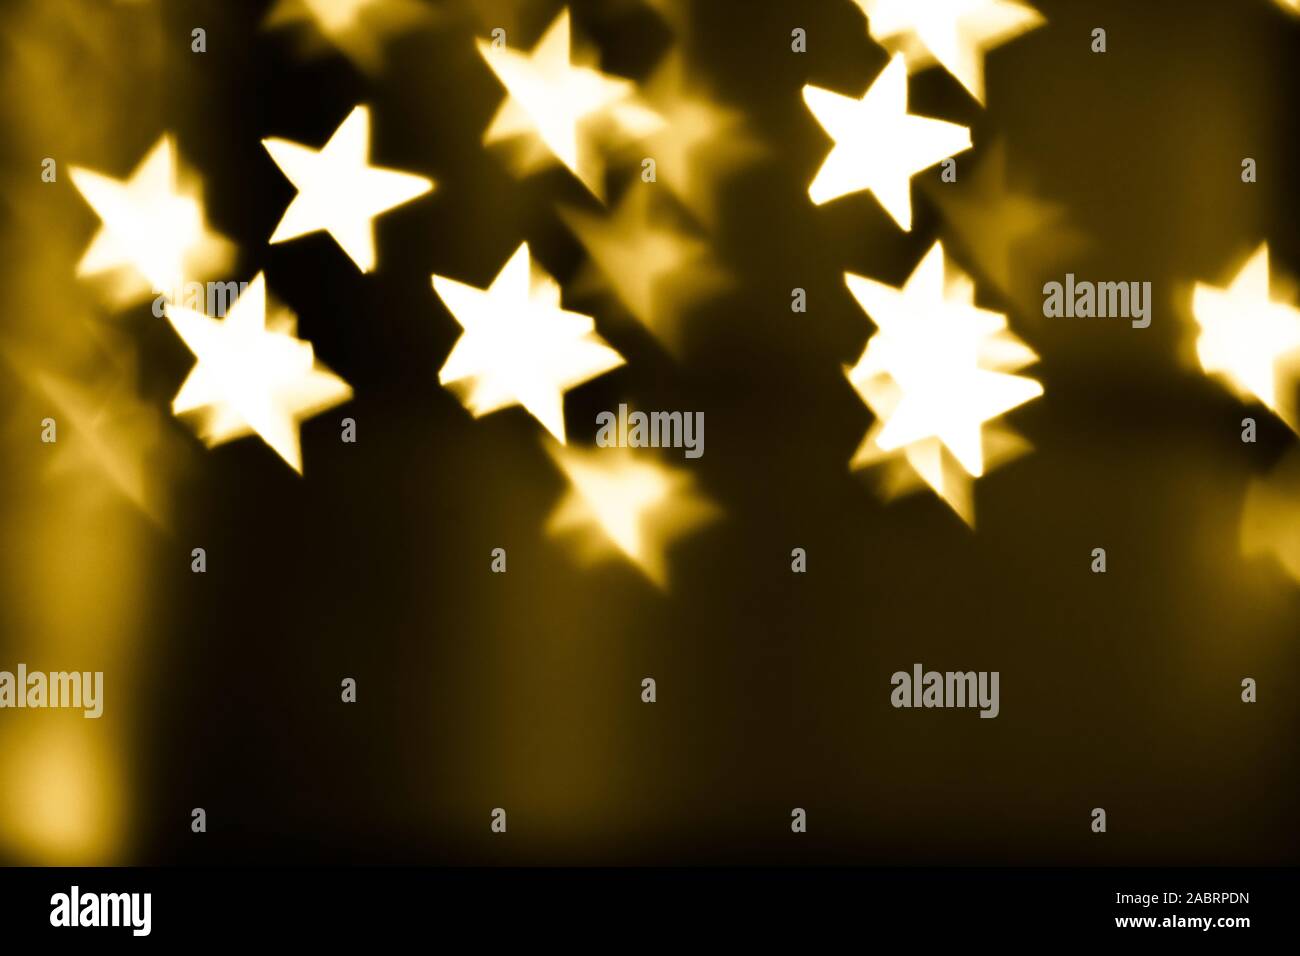 Star Overlay High Resolution Stock Photography And Images Alamy